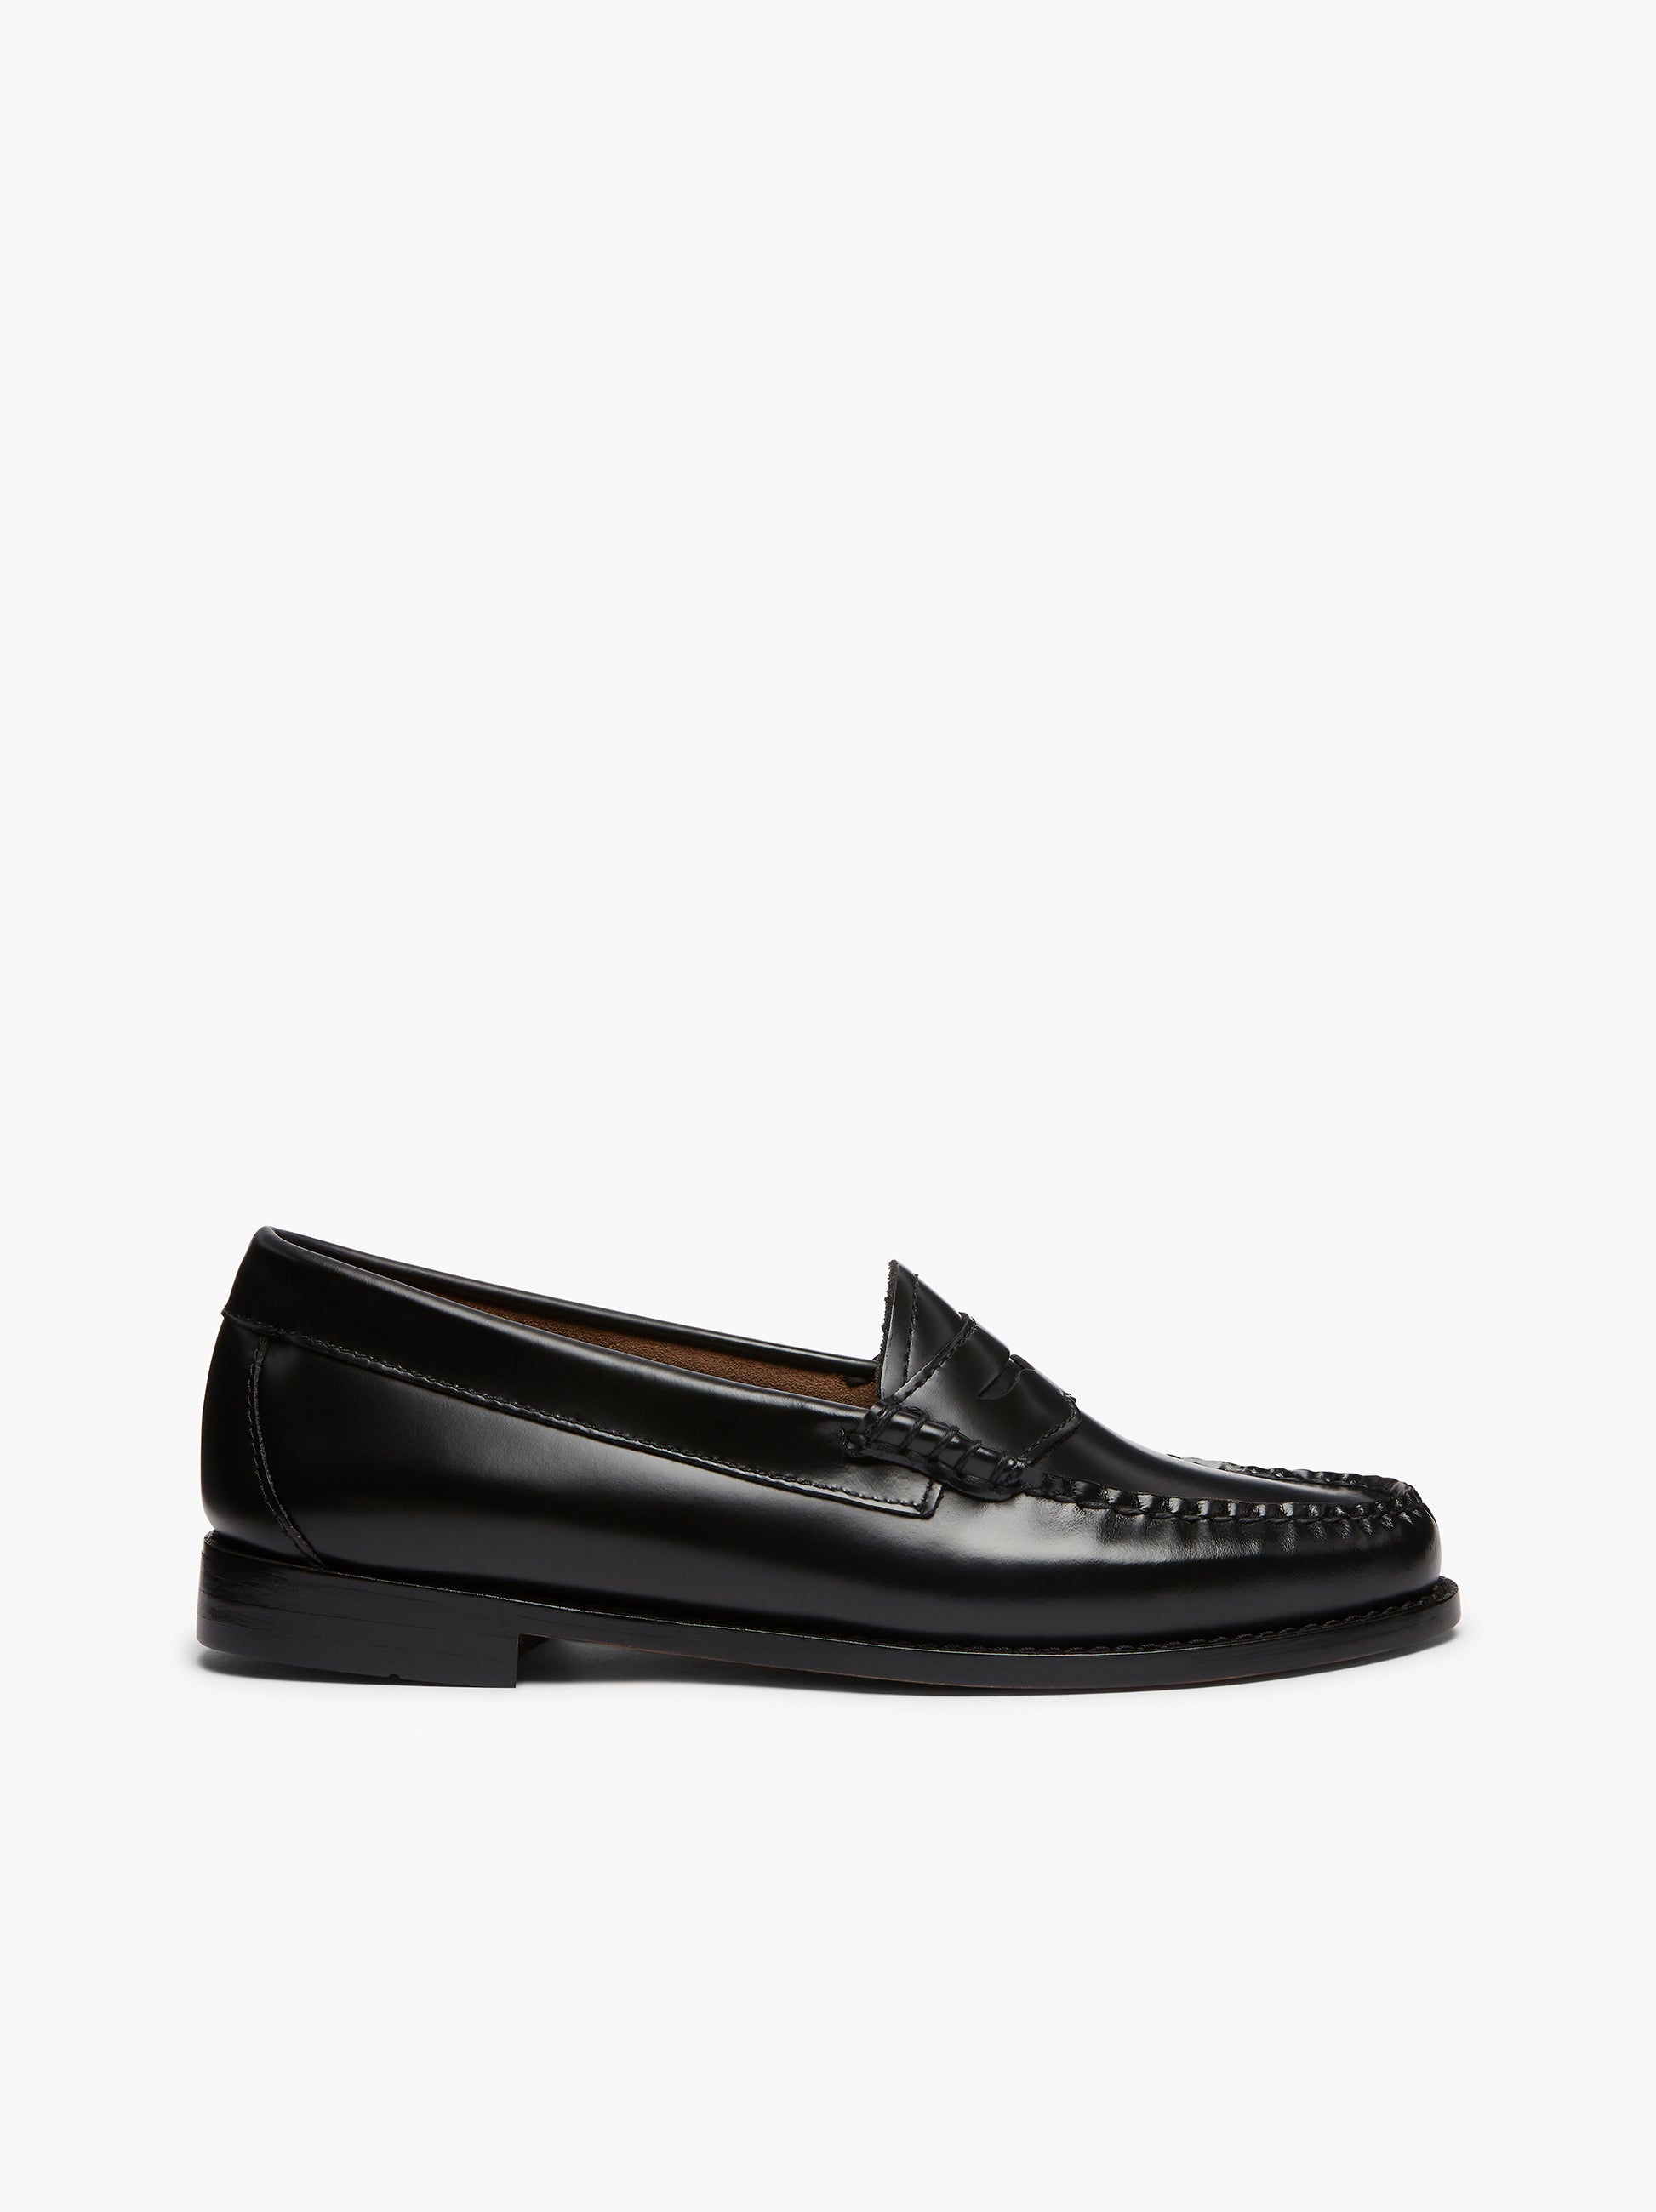 Penny Loafers Womens | Black Leather Loafers Womens – G.H.BASS